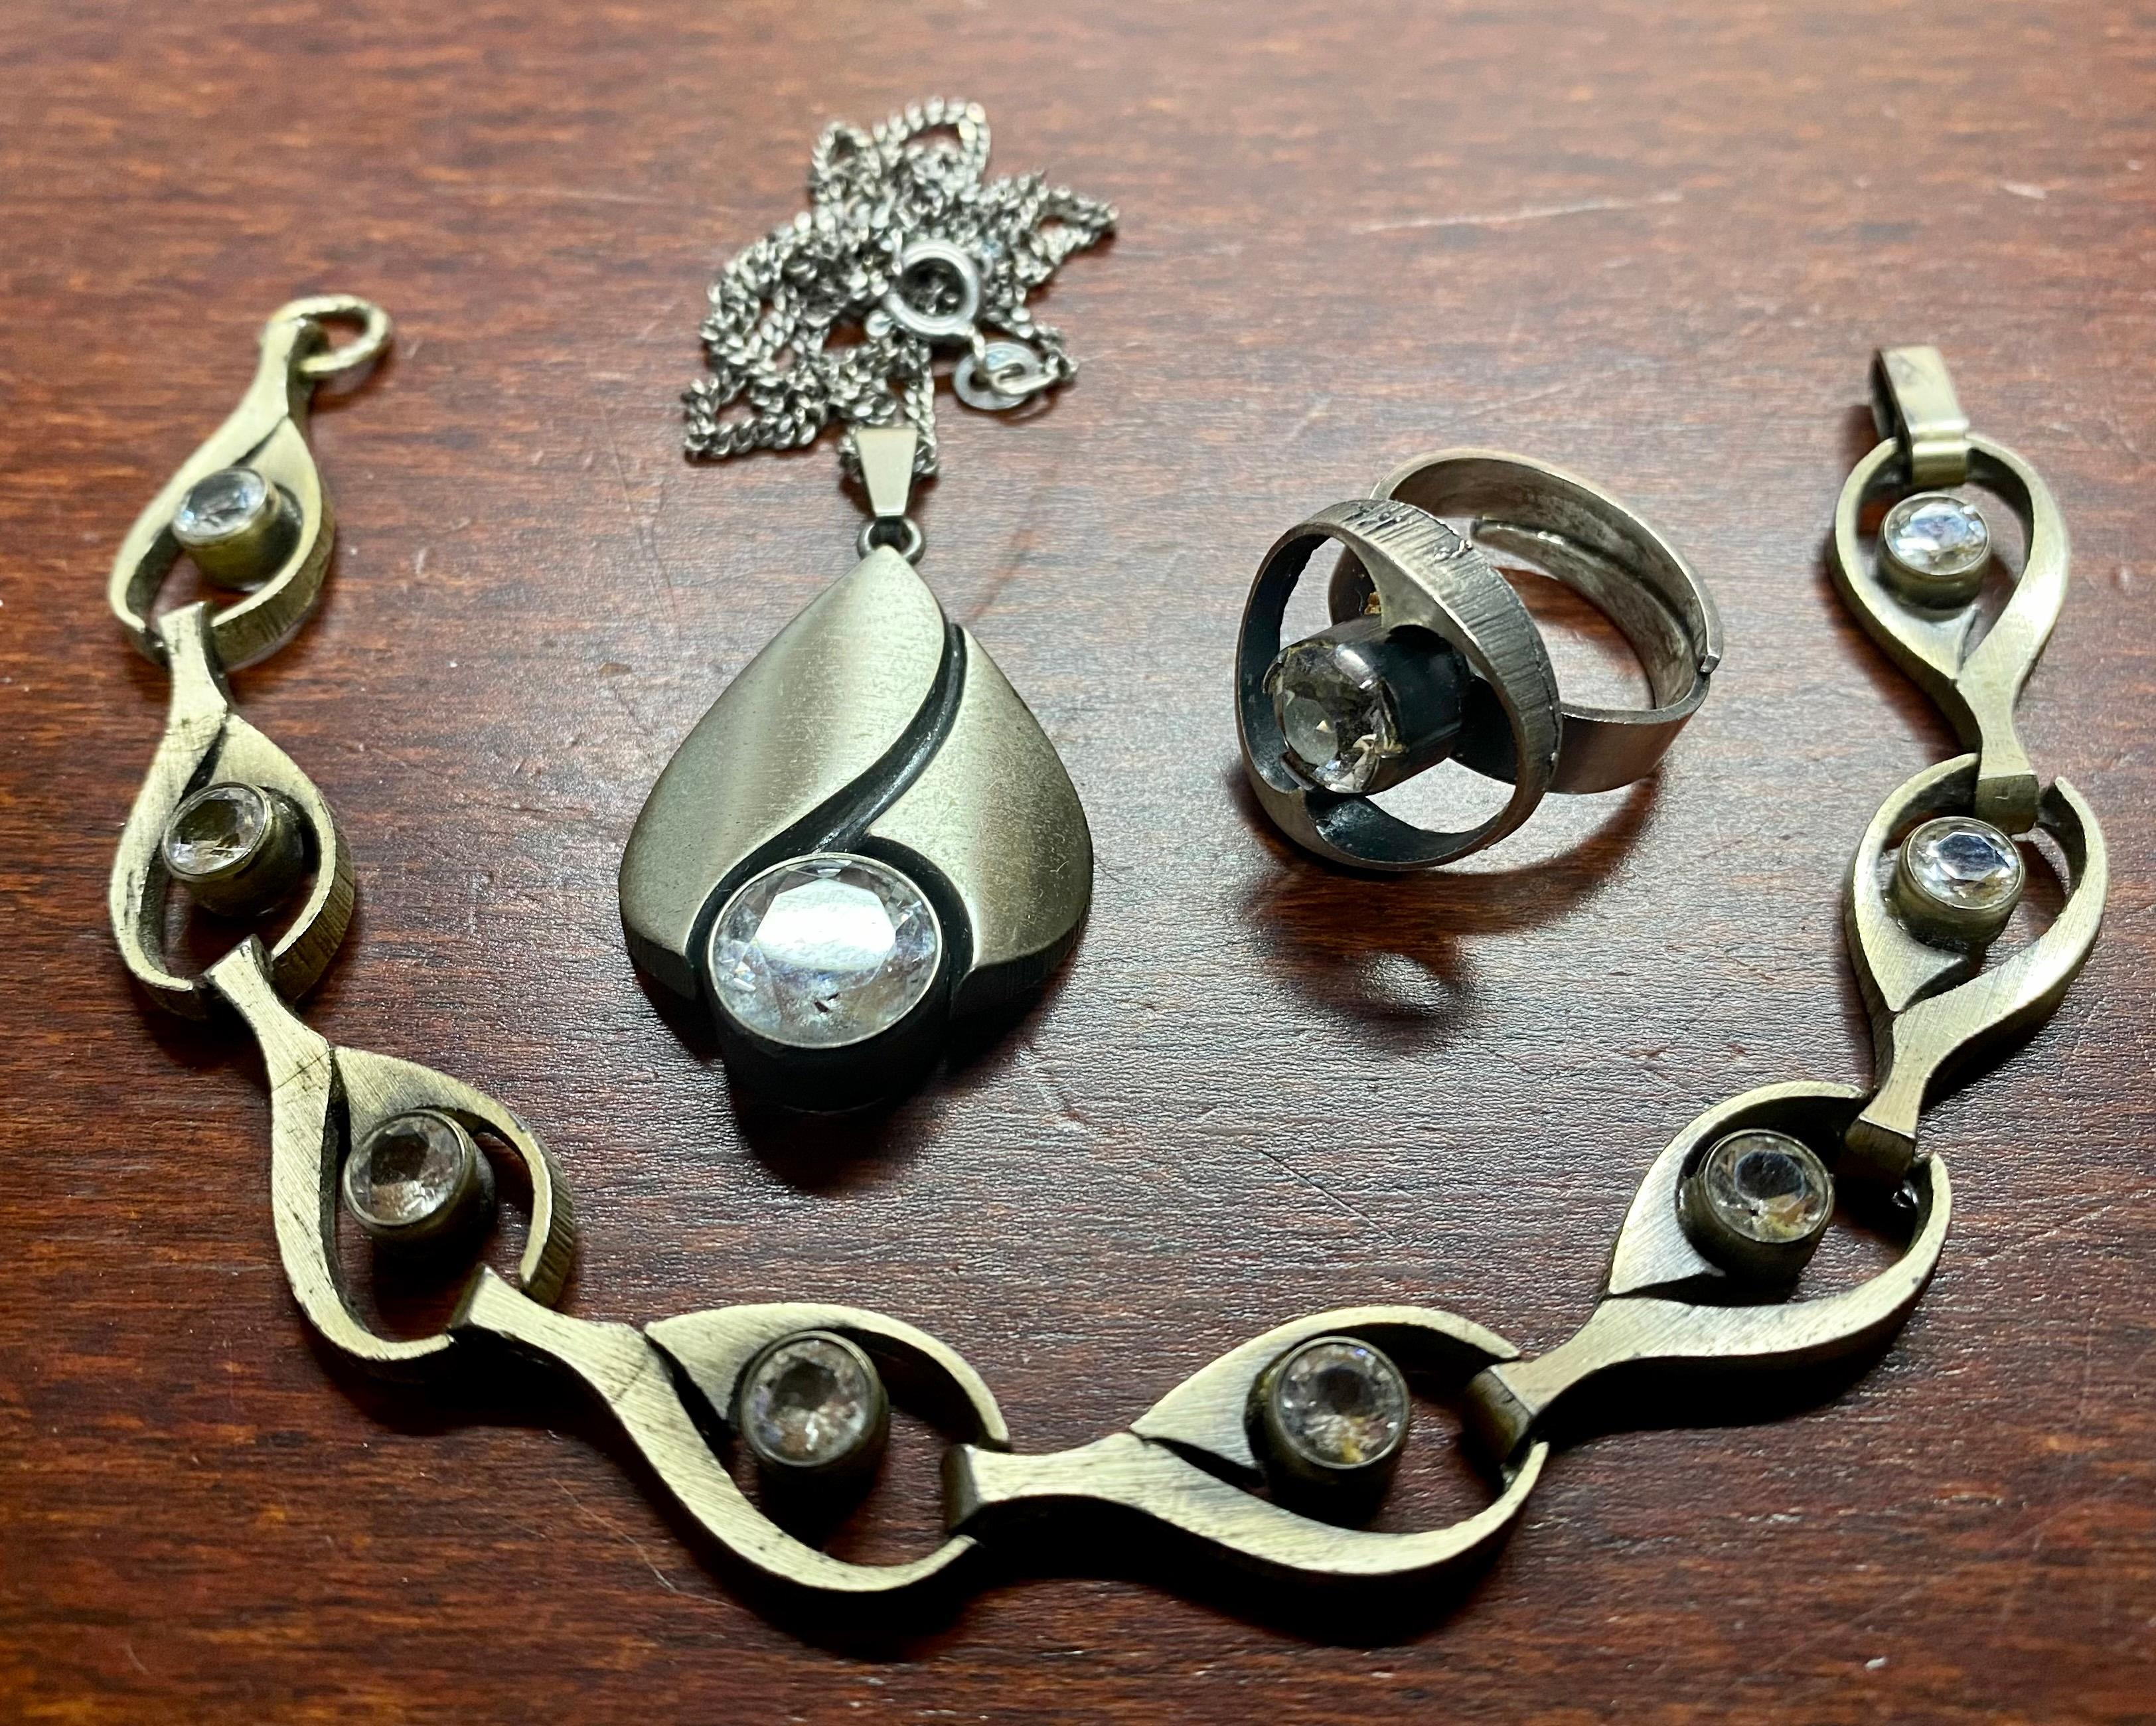 Sterling Silver Necklace, Bracelet and Ring by Karl Laine, Finland, 1970s
925H Silver
Fine set with stones
Ring size adjustable.
Now 17mm so 6.5 us ?
The bracelet is about 18.5 cm long.
Pendant height 3.4cm + loop total height about 4cm